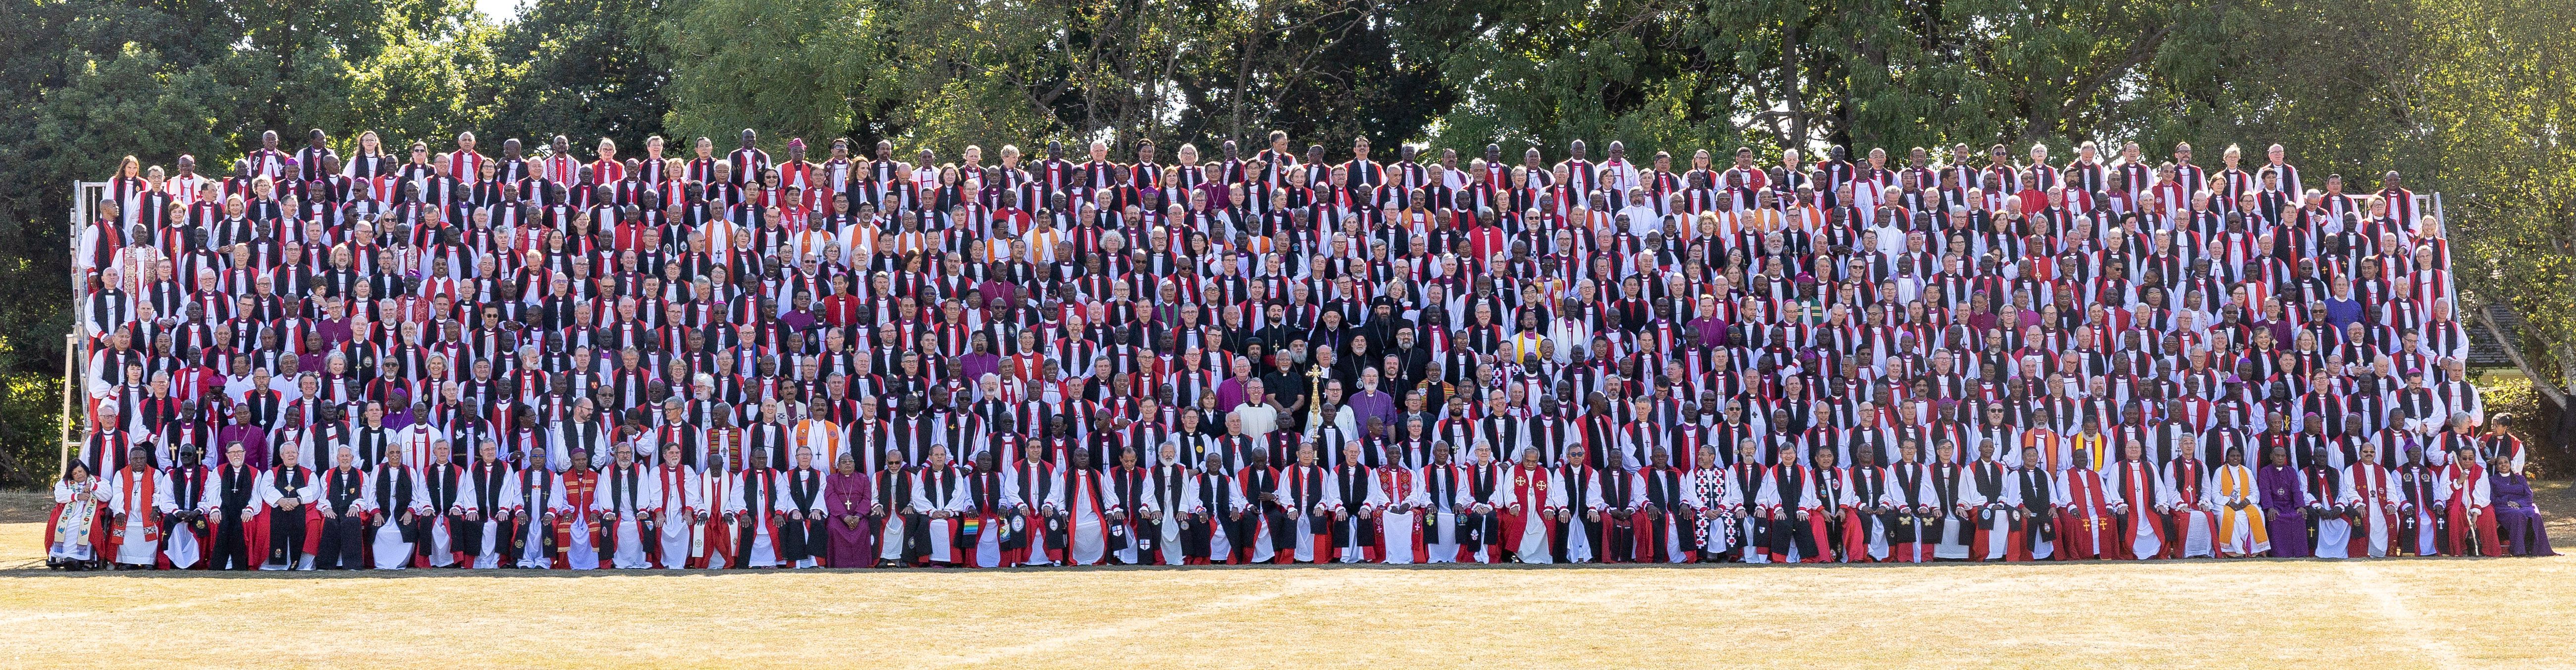 The Anglican Bishops and guests attending the Lambeth Conference pose for their group photograph during the 2022 Lambeth Conference at the University of Kent in Canterbury, United Kingdom